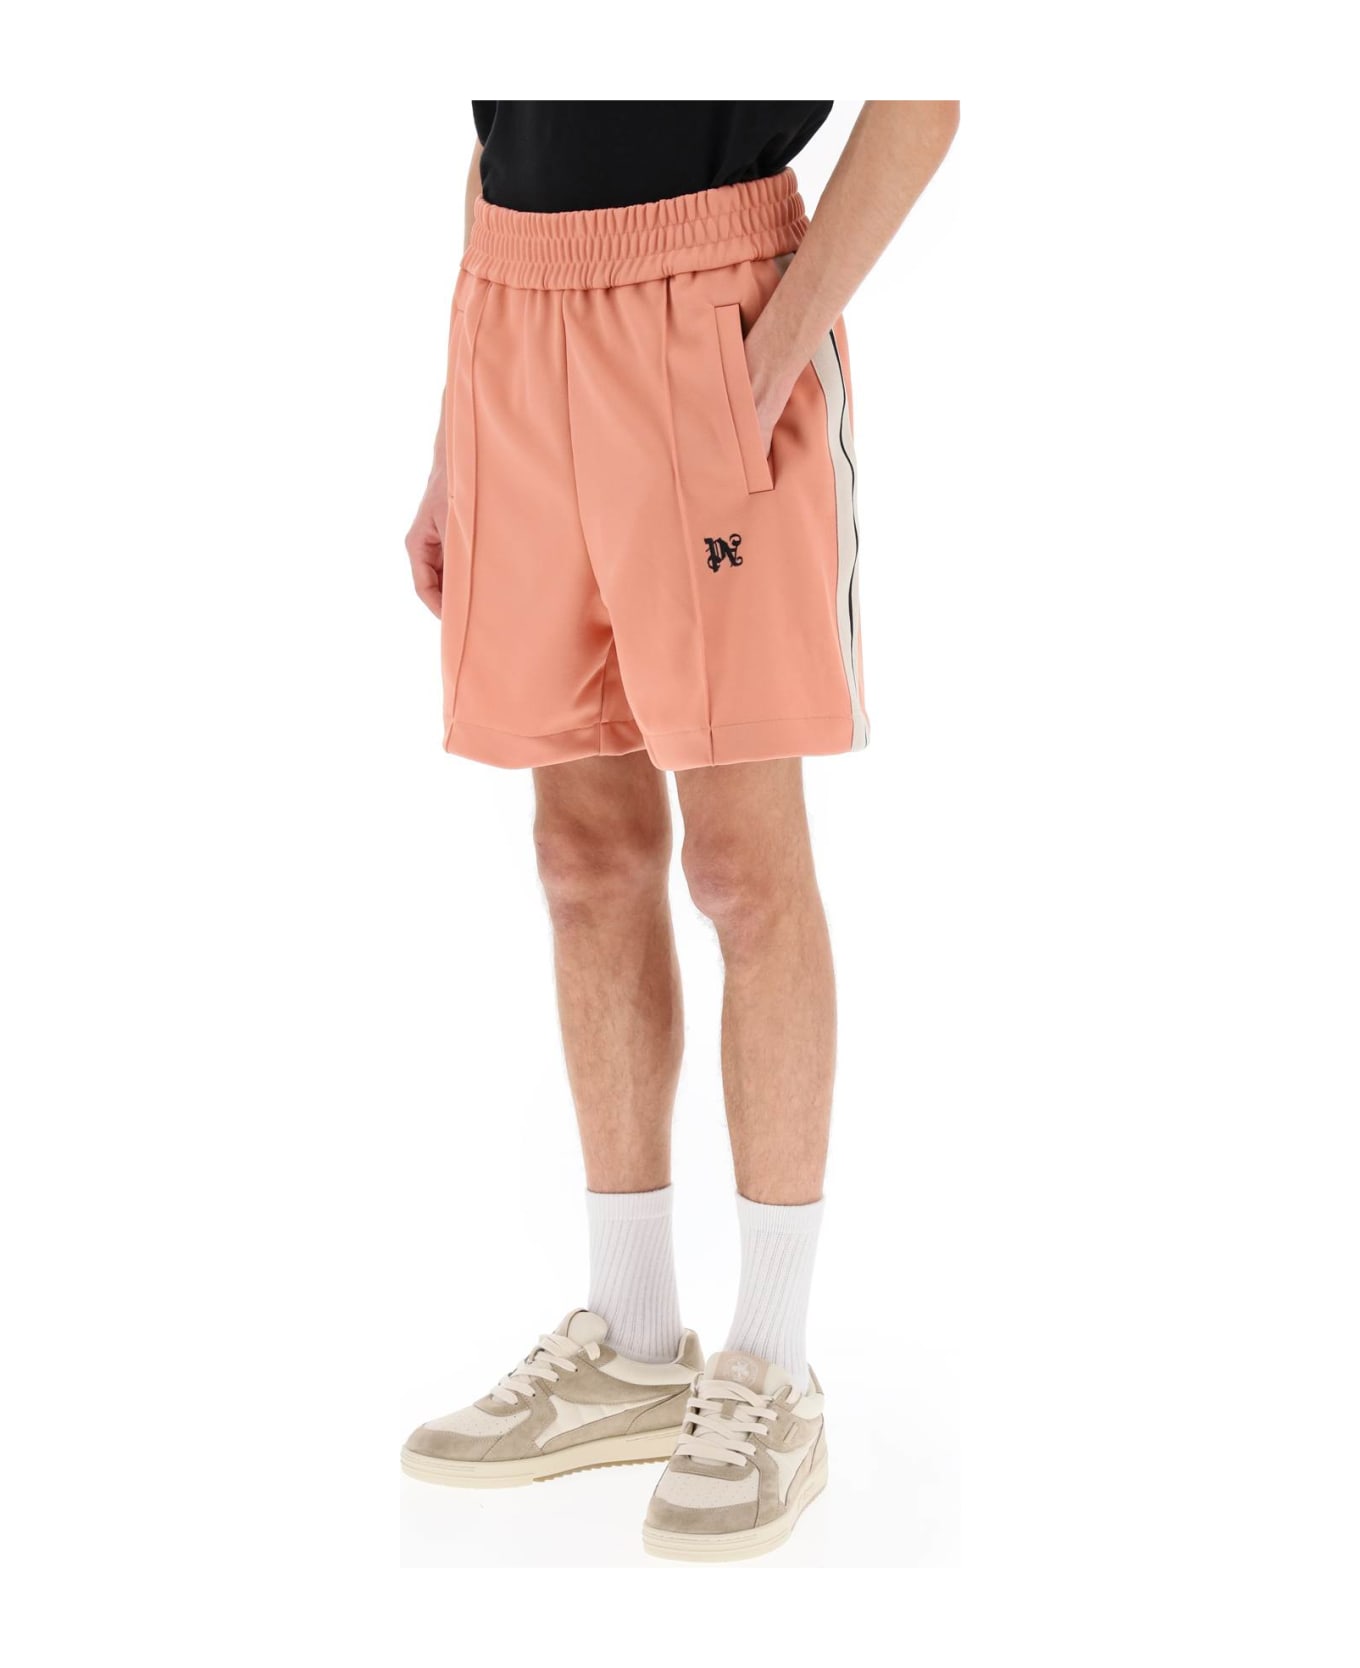 Palm Angels Sweatshorts With Side Bands - PINK BLACK (Pink) ショートパンツ